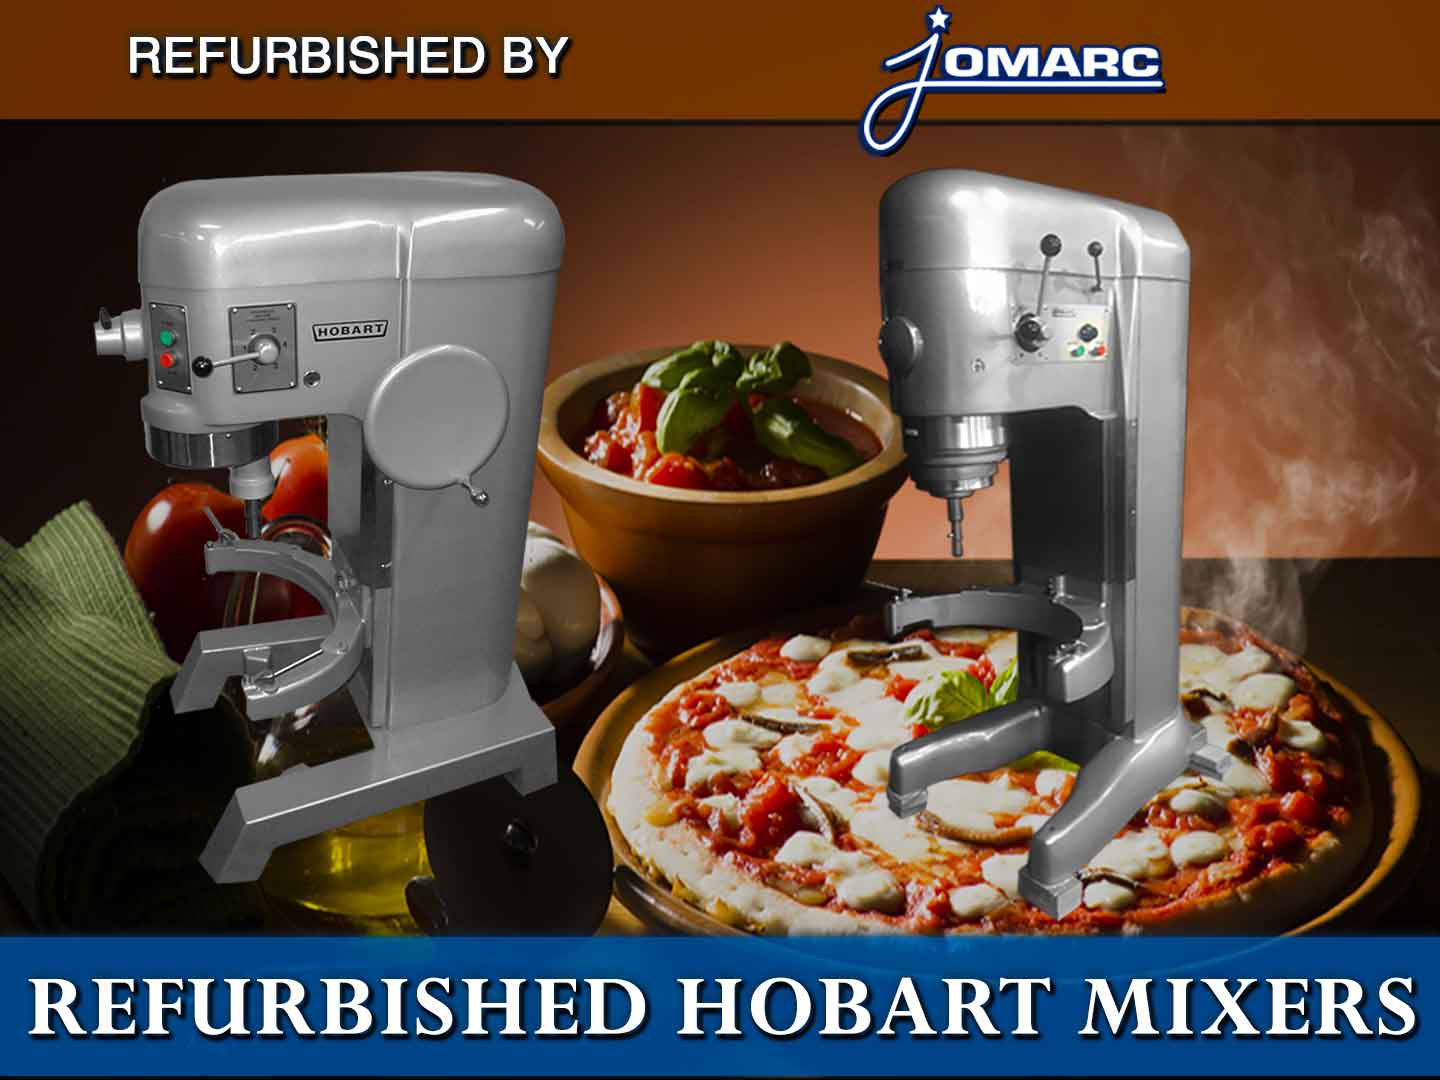 Save thousands by buying a refurbished mixer by Jomarc. Jomarc refurbishes used Hobart mixers to original factory finish. They are guaranteed and in pristine condition. We will ship to US, Canada, Quebec & France. Freight Shipping Rates added to price. Click here for more information 